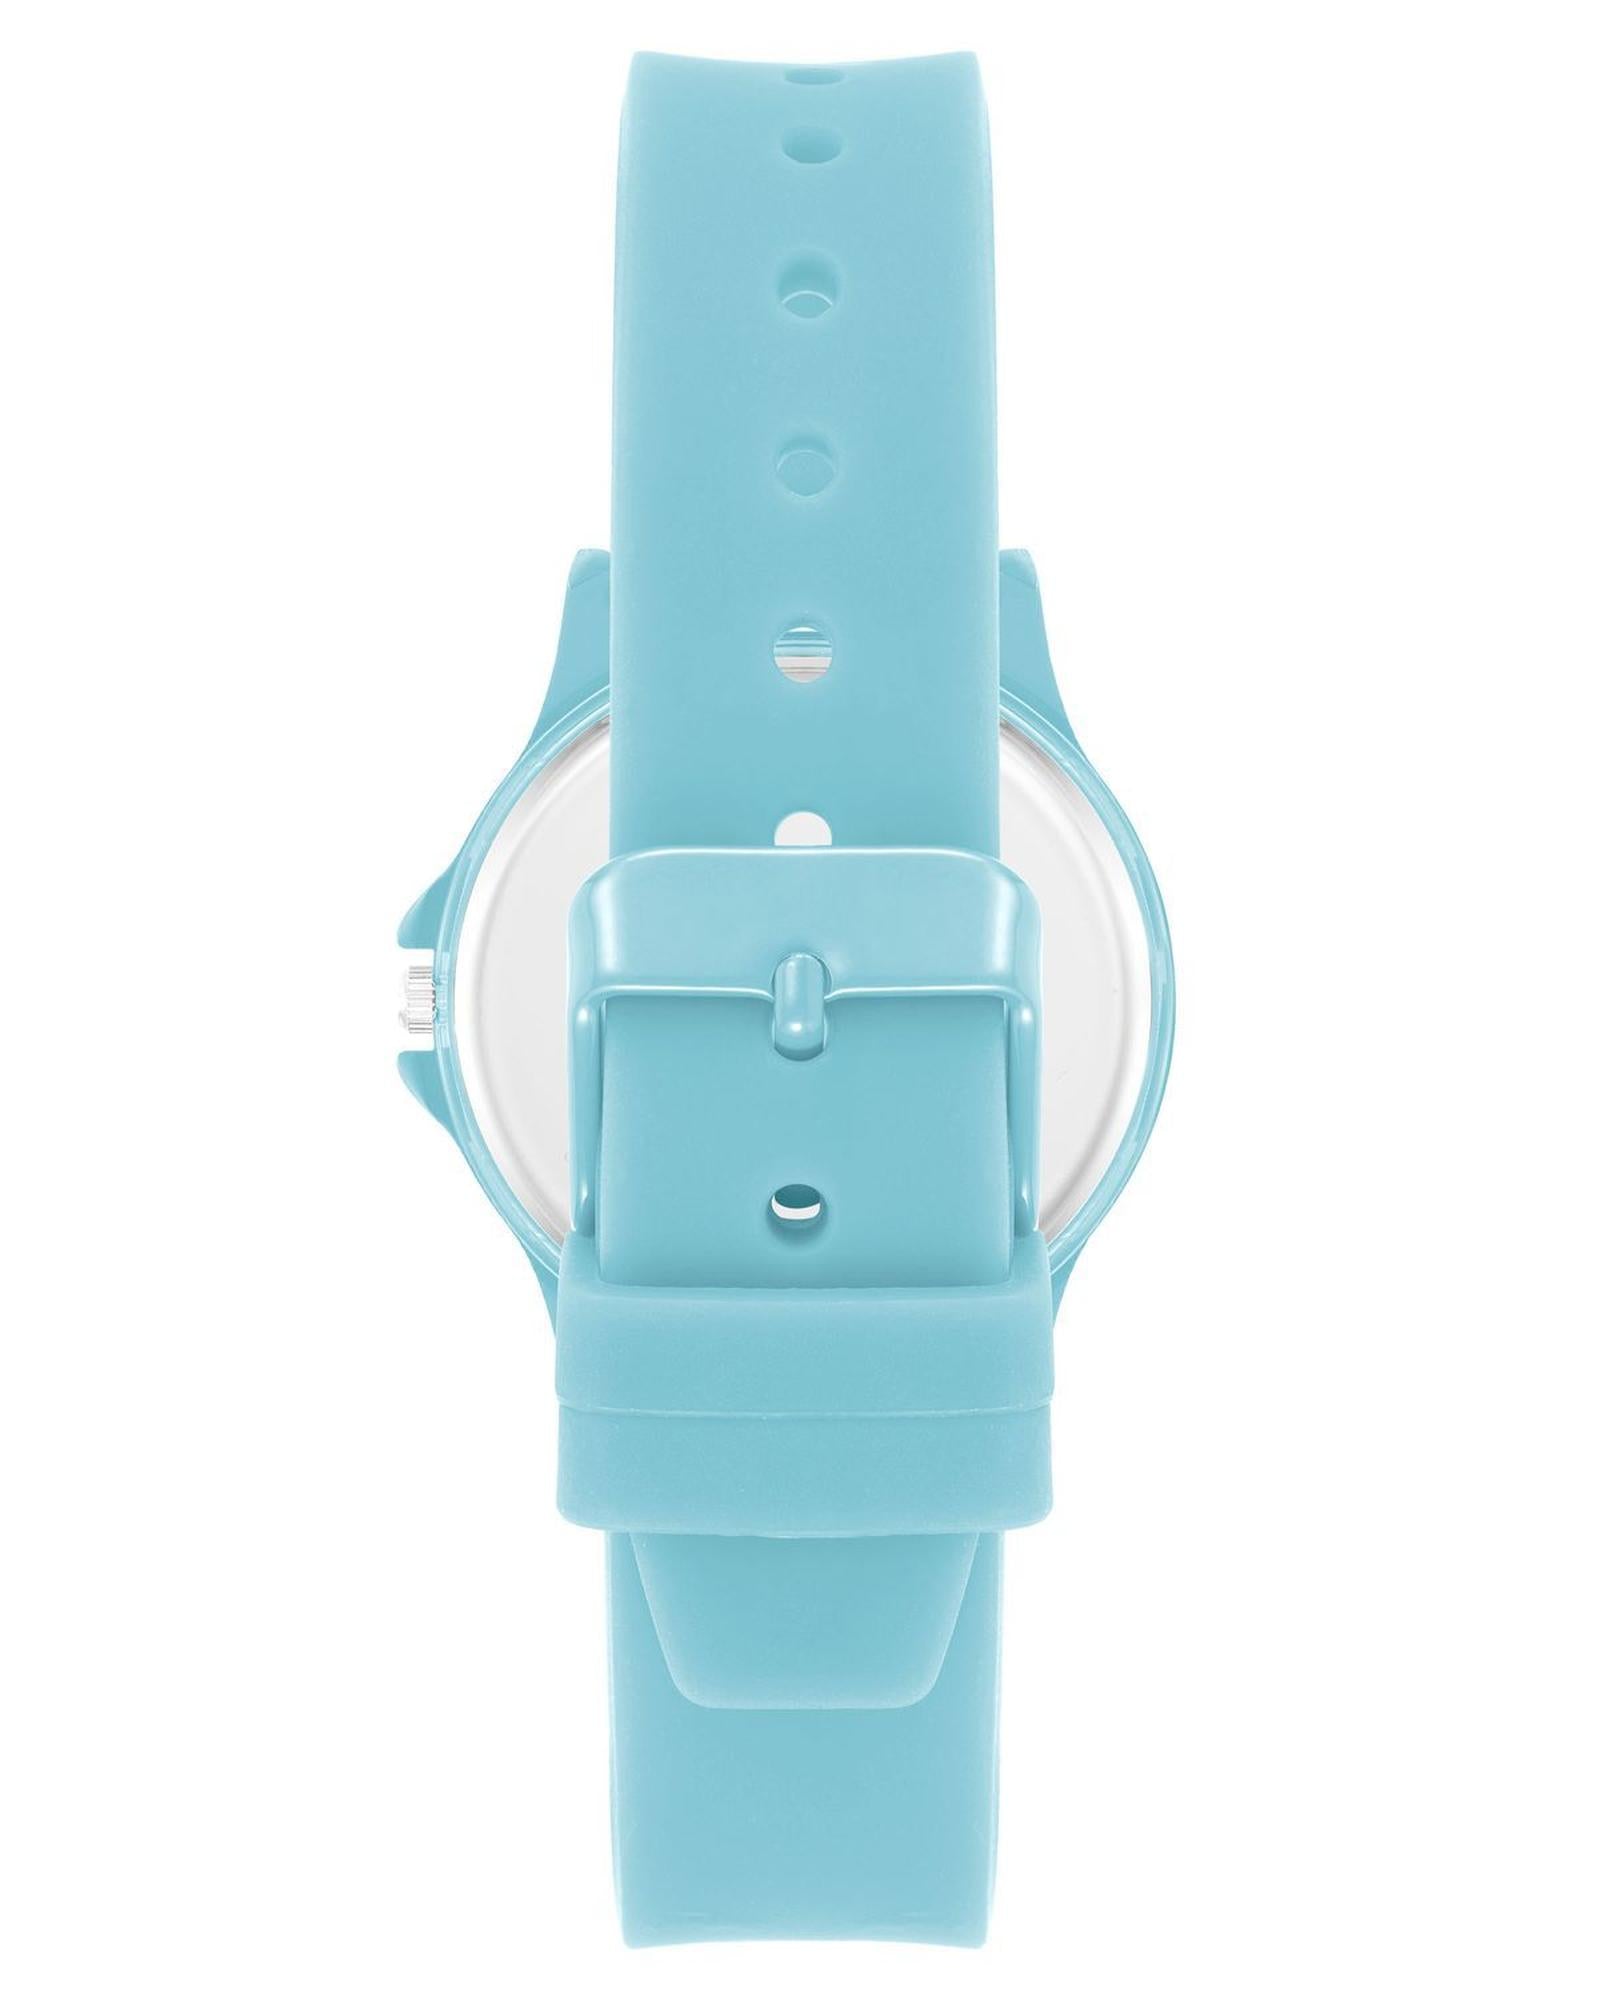 Blue Analog Fashion Watch with Rhine Stone Facing and Pin Buckle Closure One Size Women